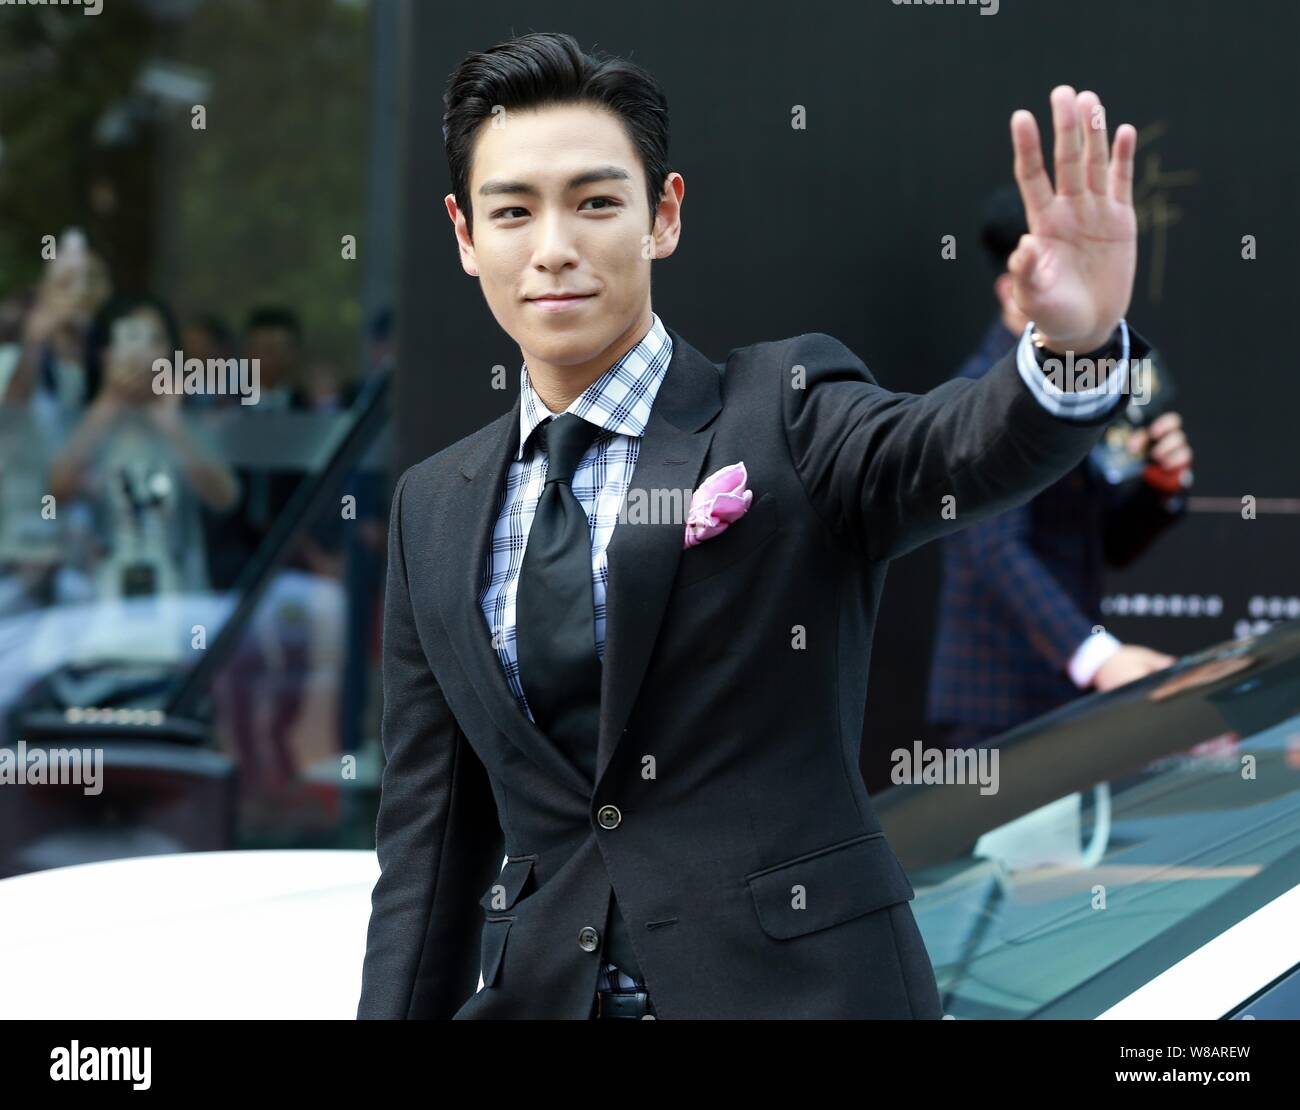 Singer and actor Choi Seung-hyun, better known by his stage name T.O.P, of  South Korean boy band Bigbang (Big Bang), arrives at a press conference for  Stock Photo - Alamy